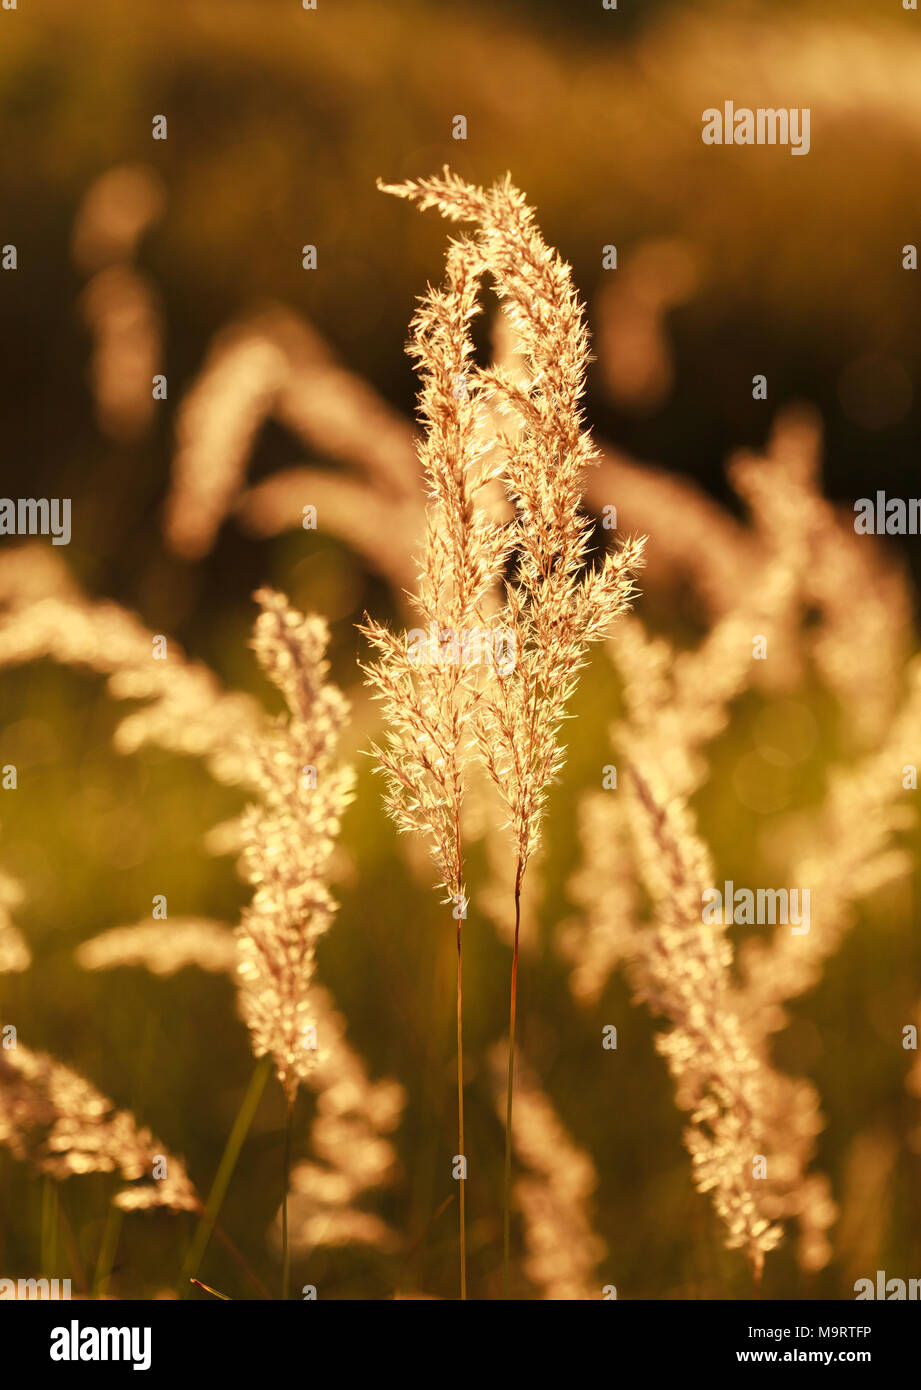 Meadow fescue grass  (Festuca ovina)  at sunset, selective focus on some branches Stock Photo